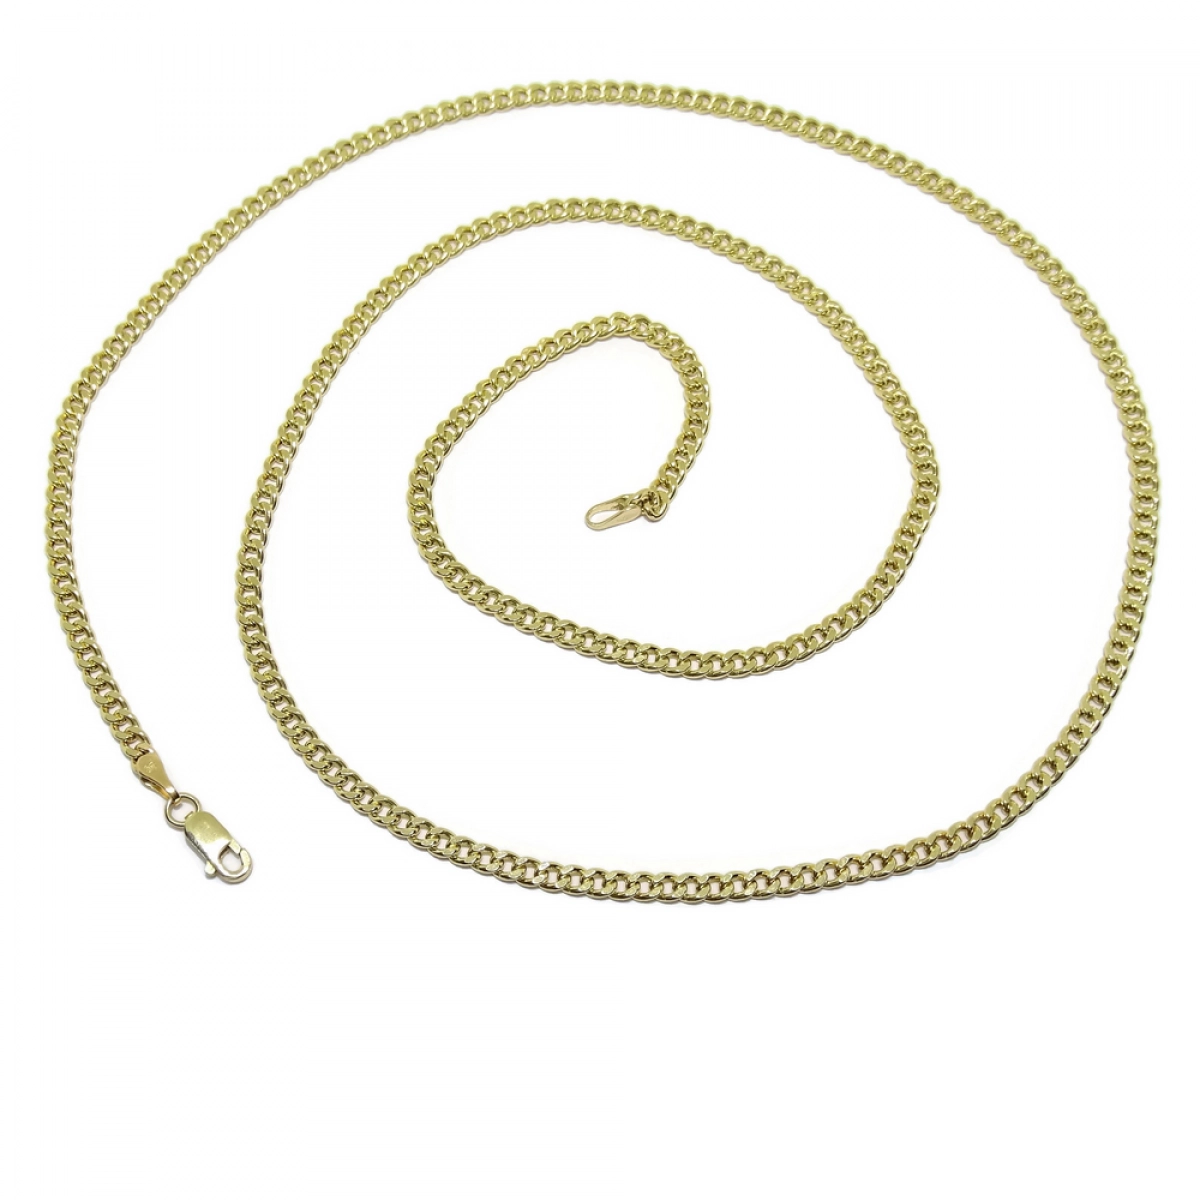 CHAIN NECKLACE IN 18K YELLOW GOLD FOR MAN TYPE CURB 3MM WIDE AND 60CM LONG NEVER SAY NEVER